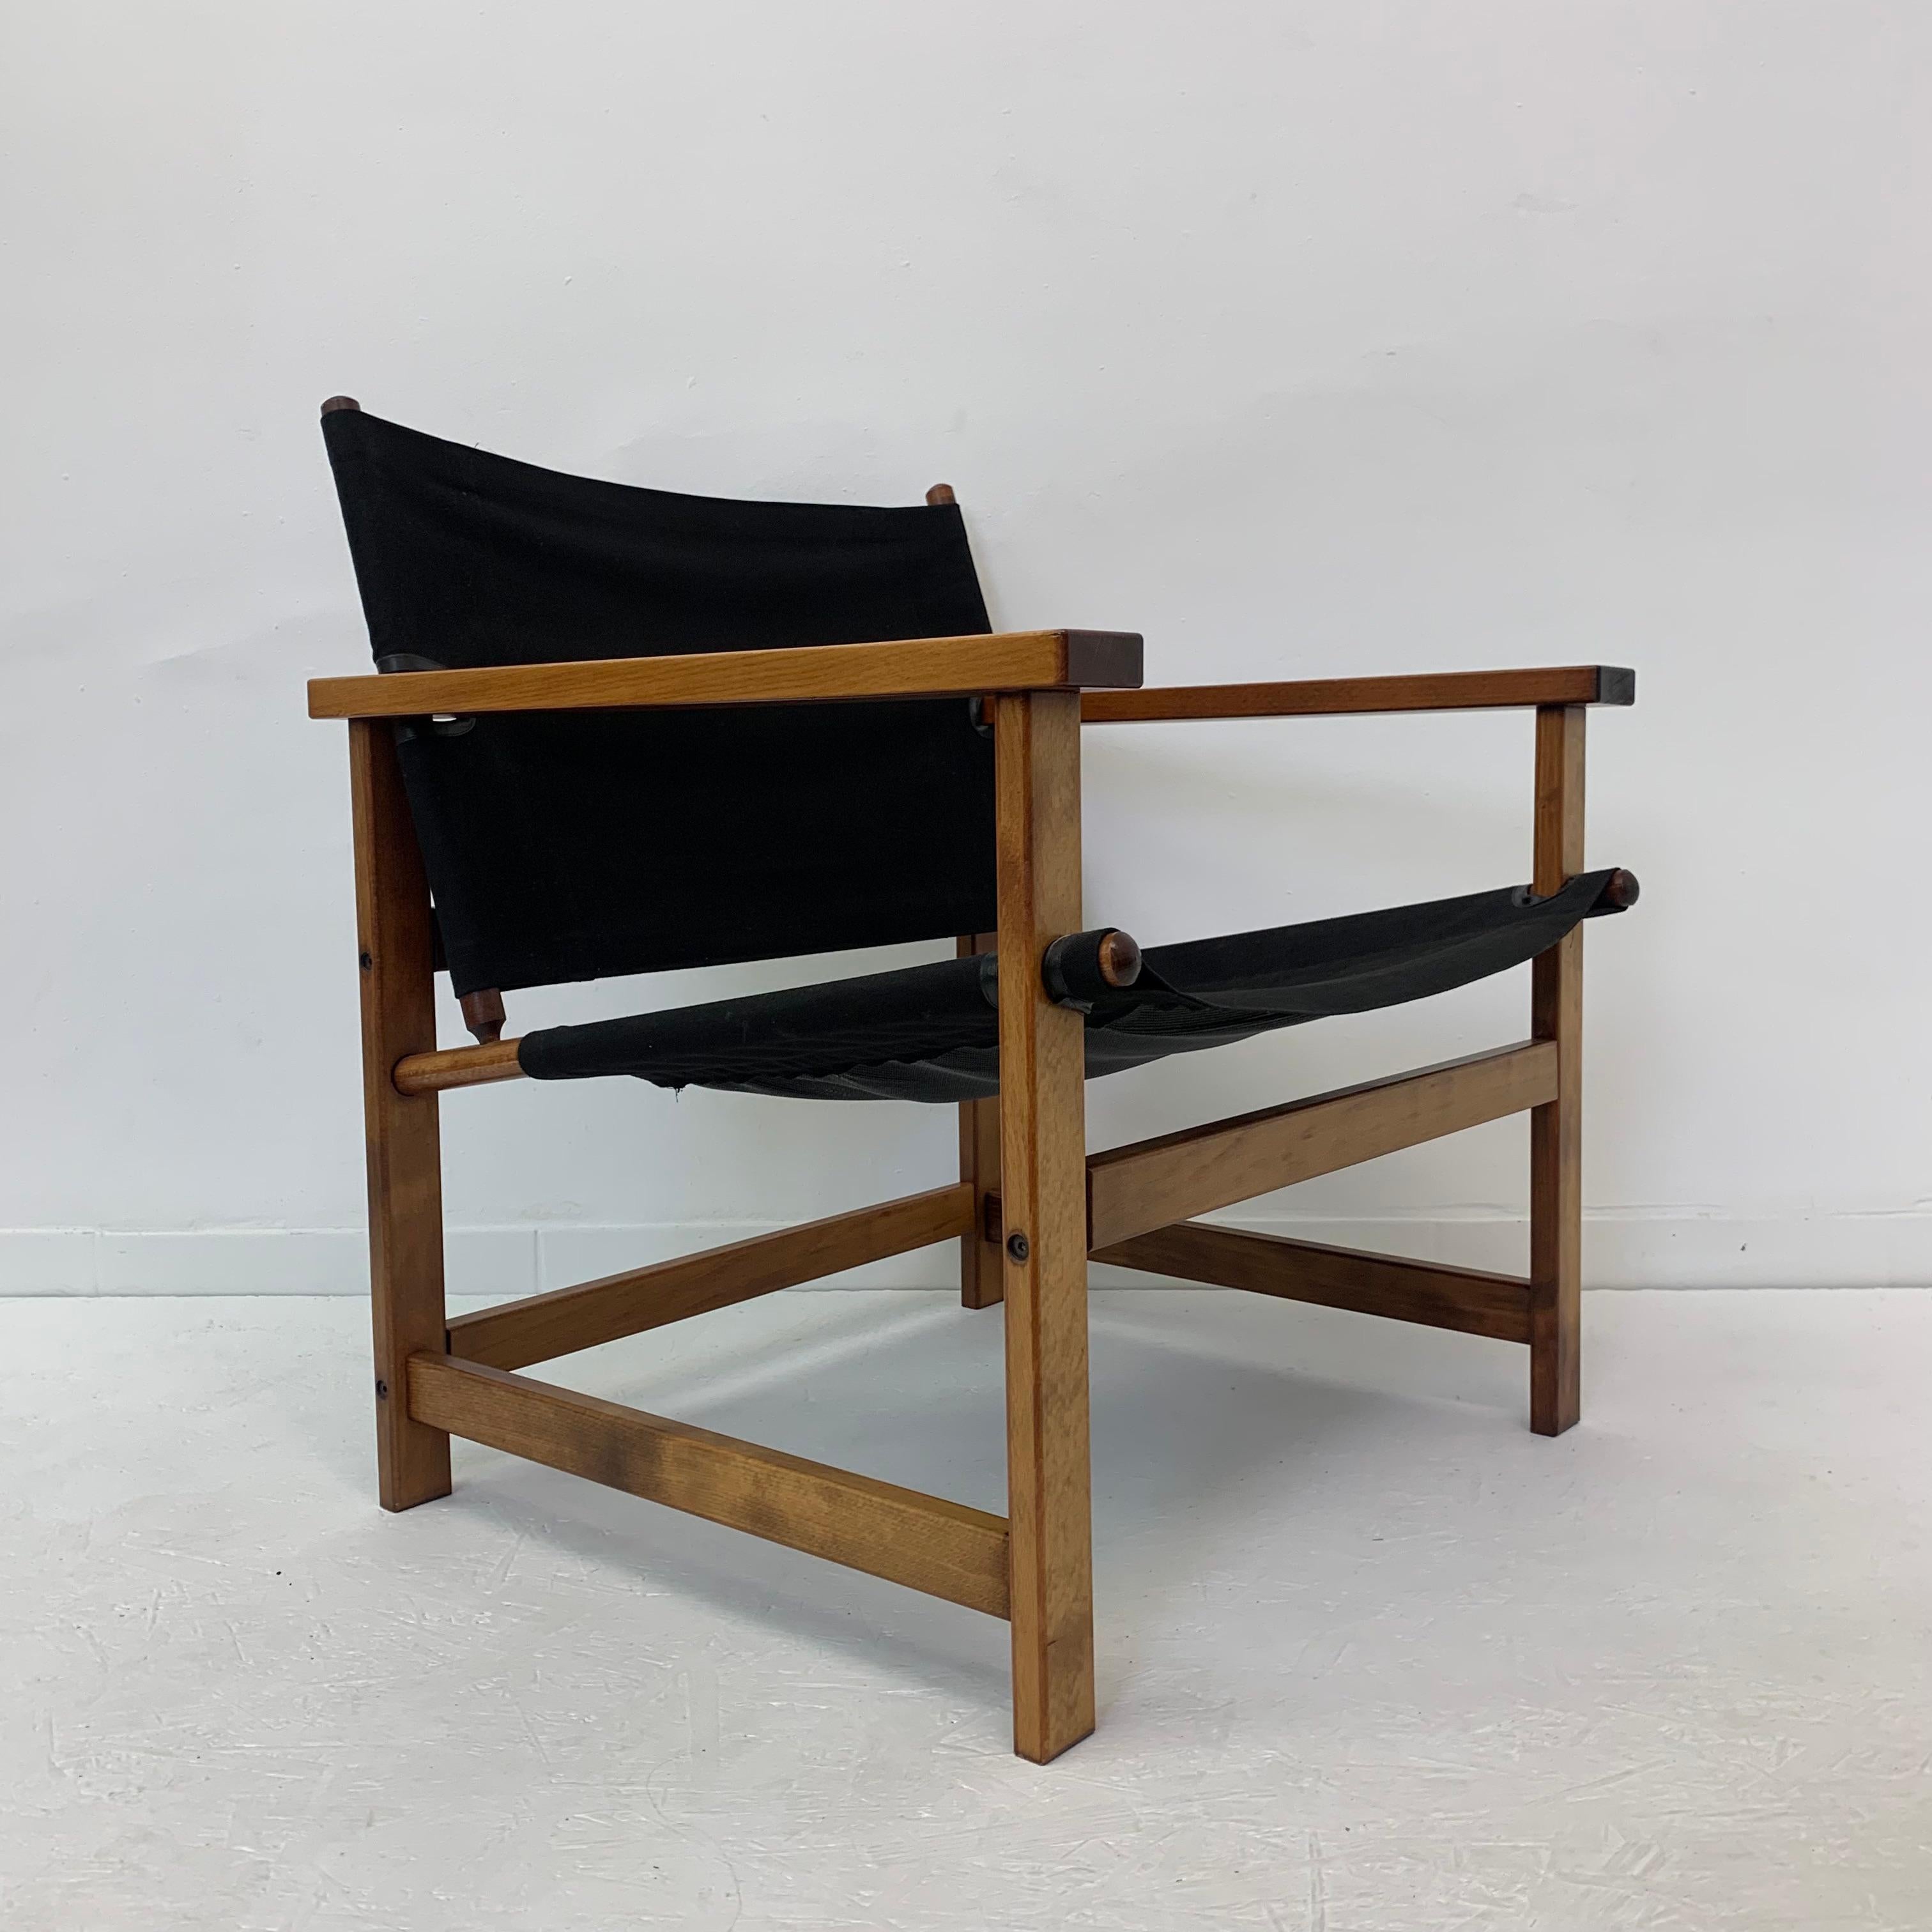 Late 20th Century Mid-Century Desgn Safari Chair by Hyllinge Møbler Denmark, 1970’s For Sale